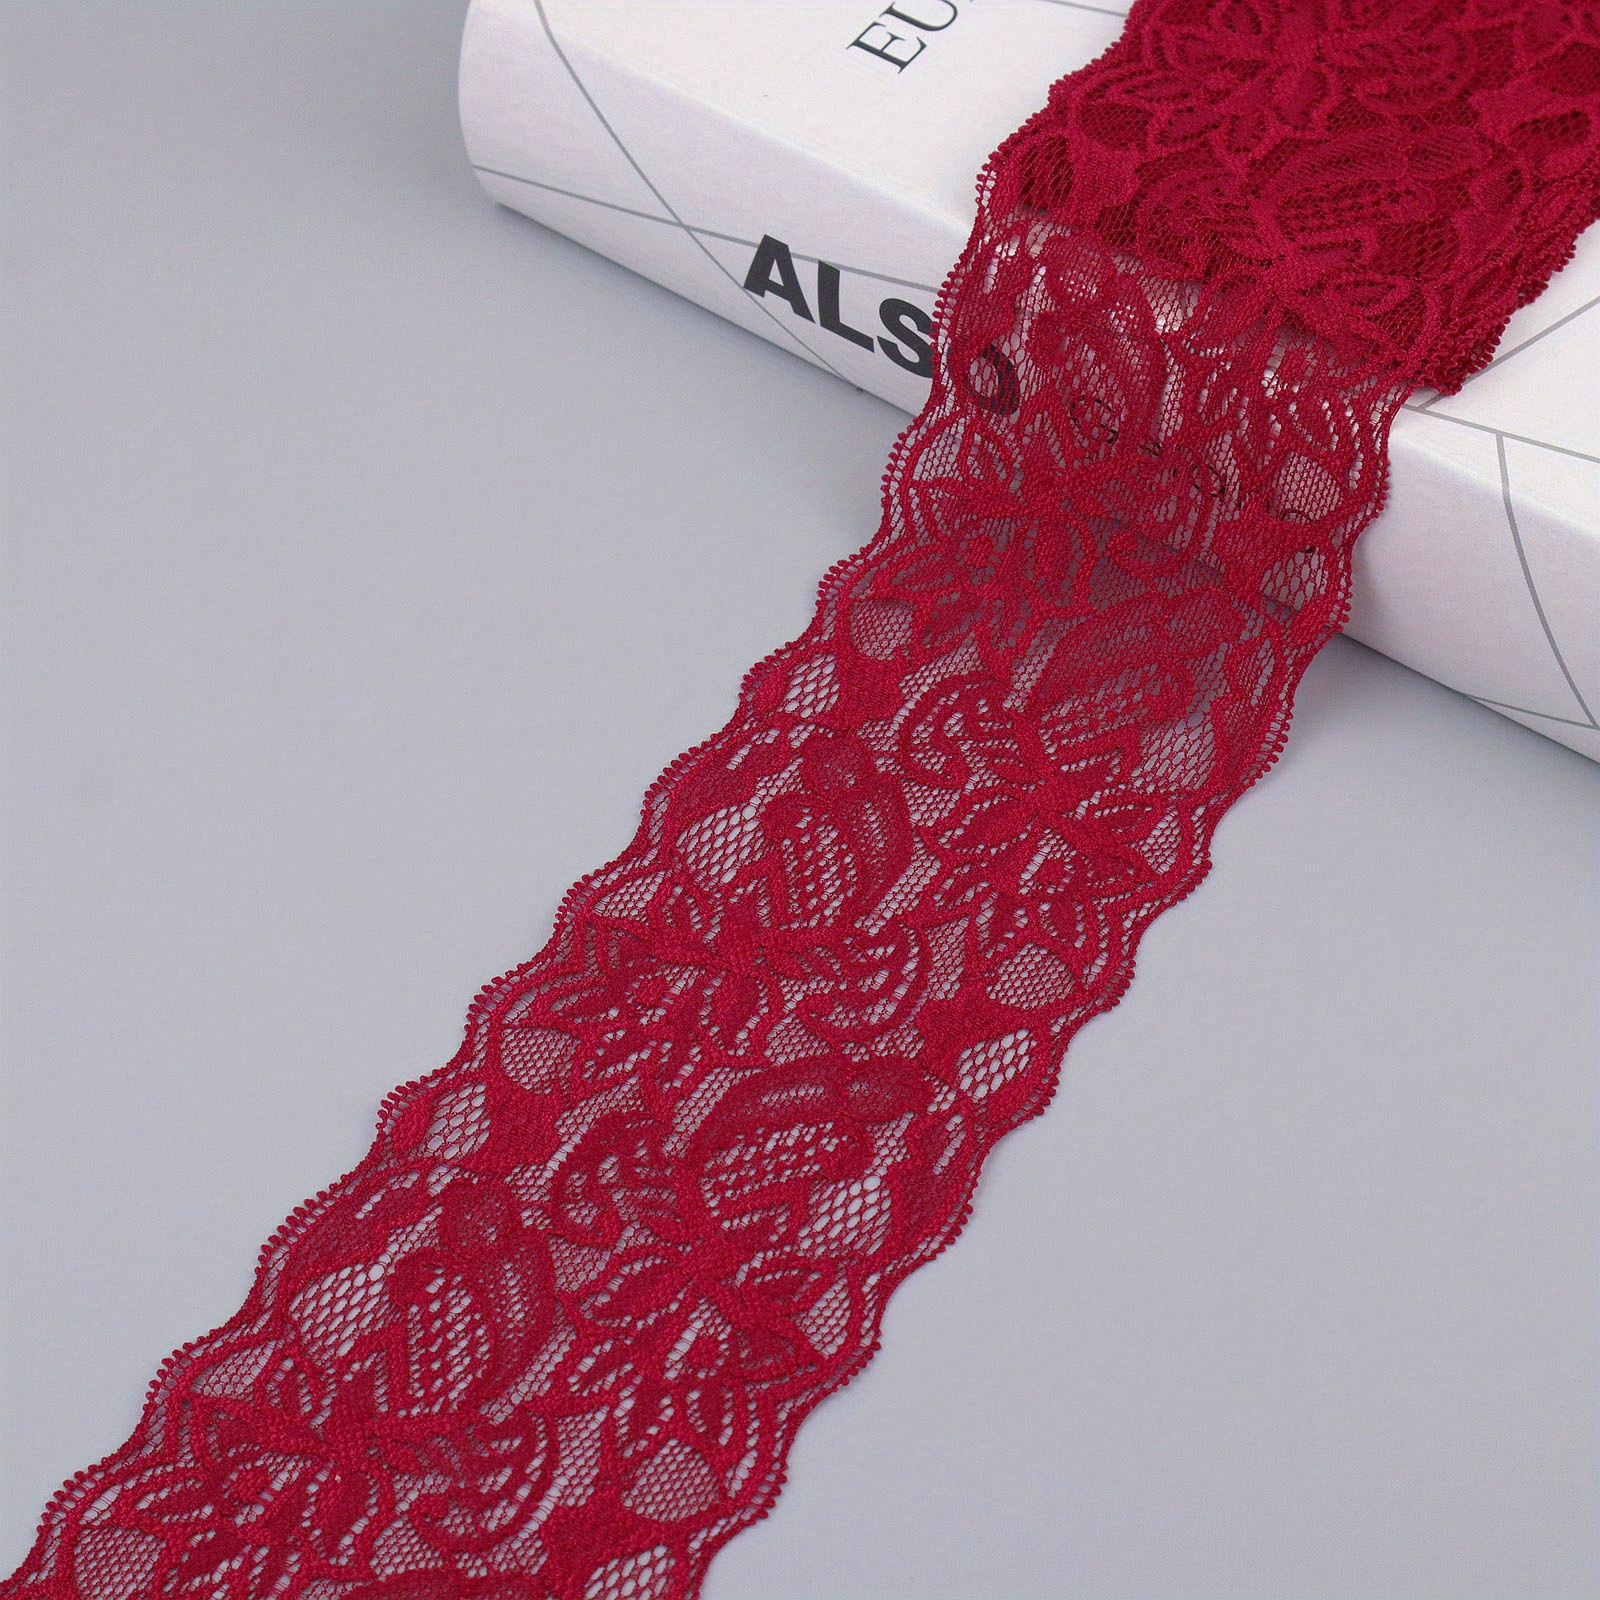 Burgundy stretch lace trimming - Lace To Love